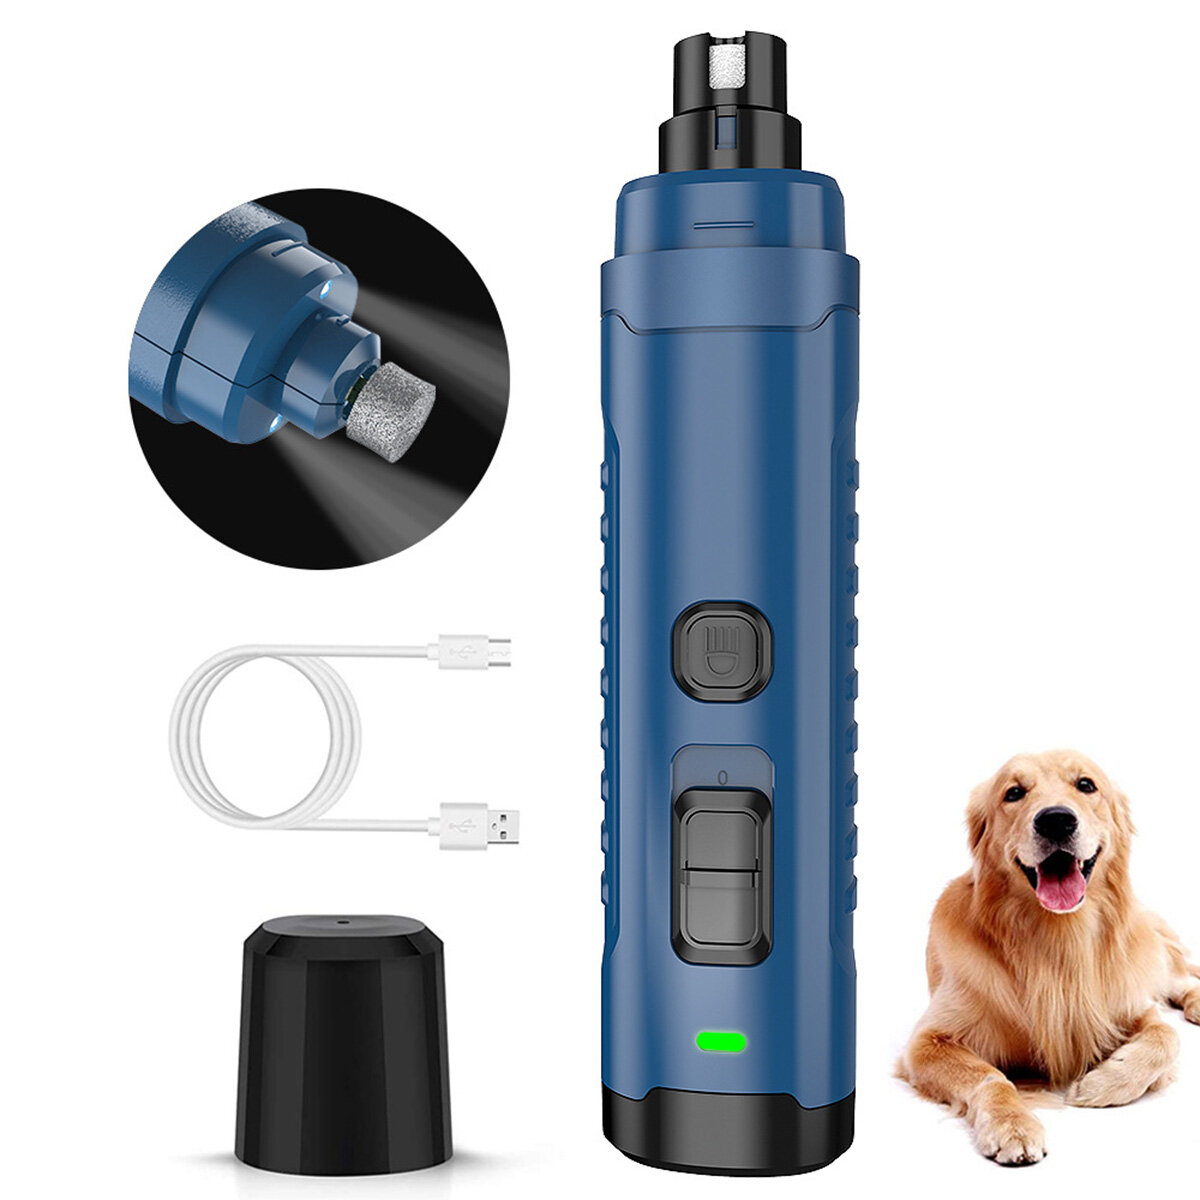 Portable 2 LED Light USB Rechargeable Electric Dog Nail Grinder Professional 2-Speed Grooming Trimming Pets